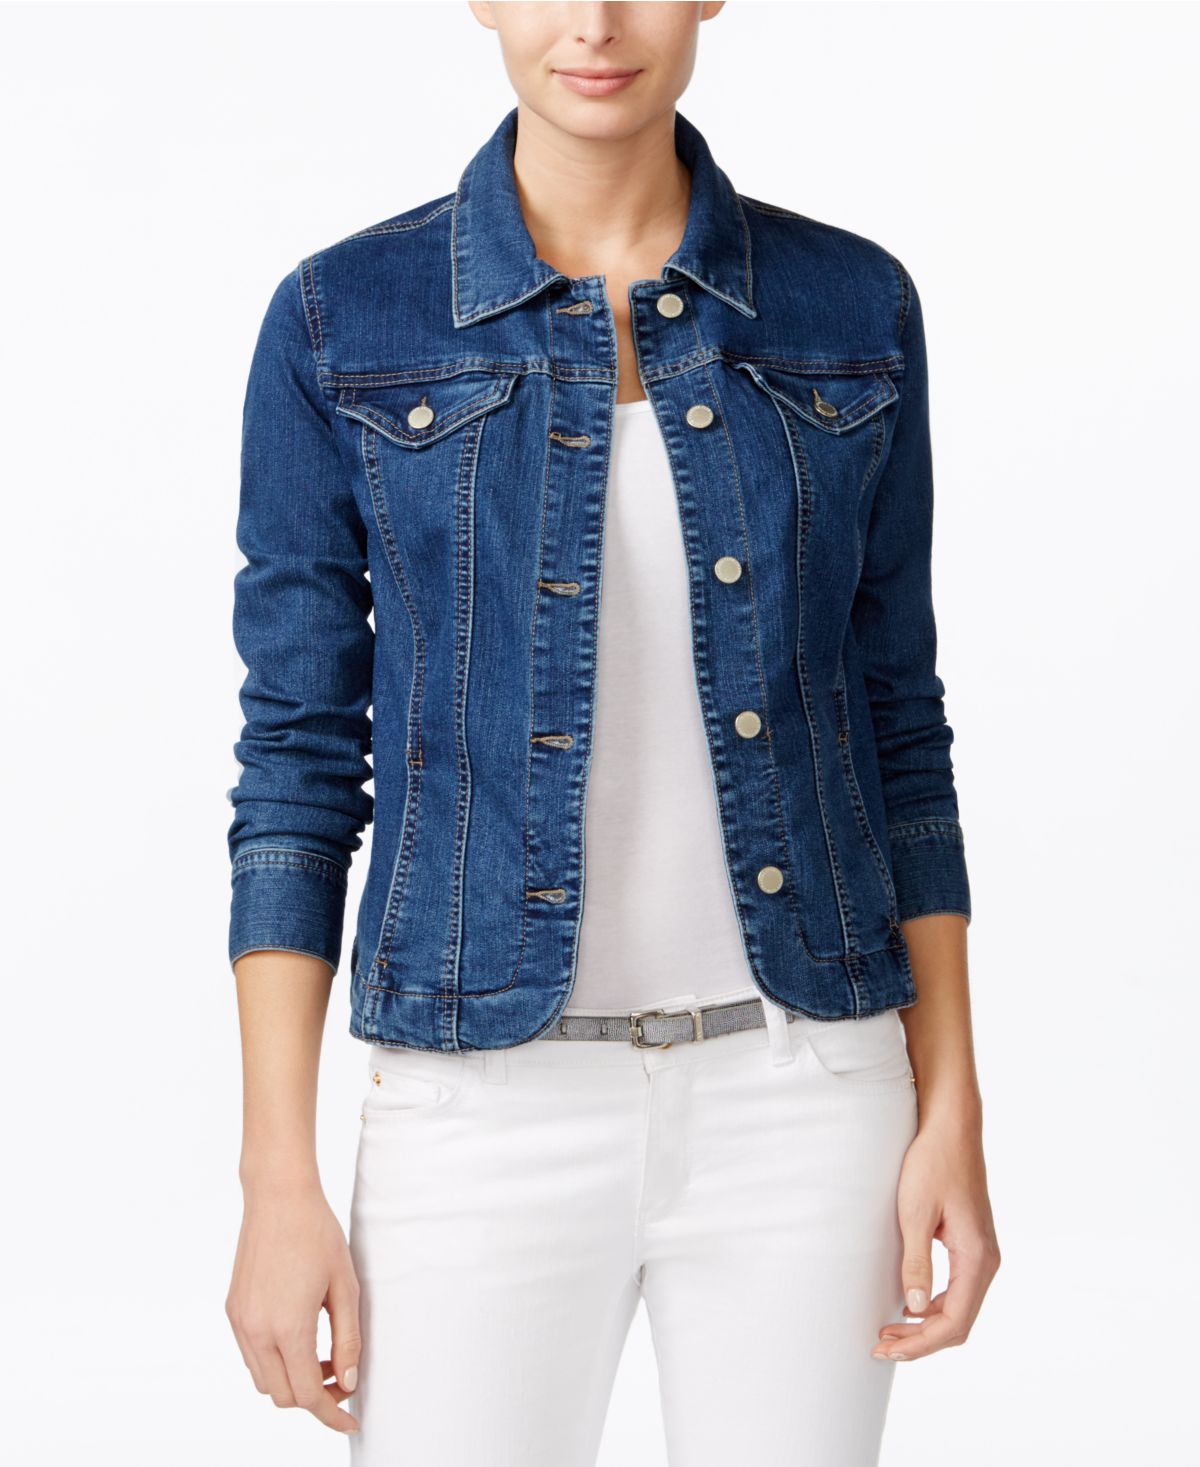 97% of Reviewers Recommend This Denim Jacket - Blogs & Forums